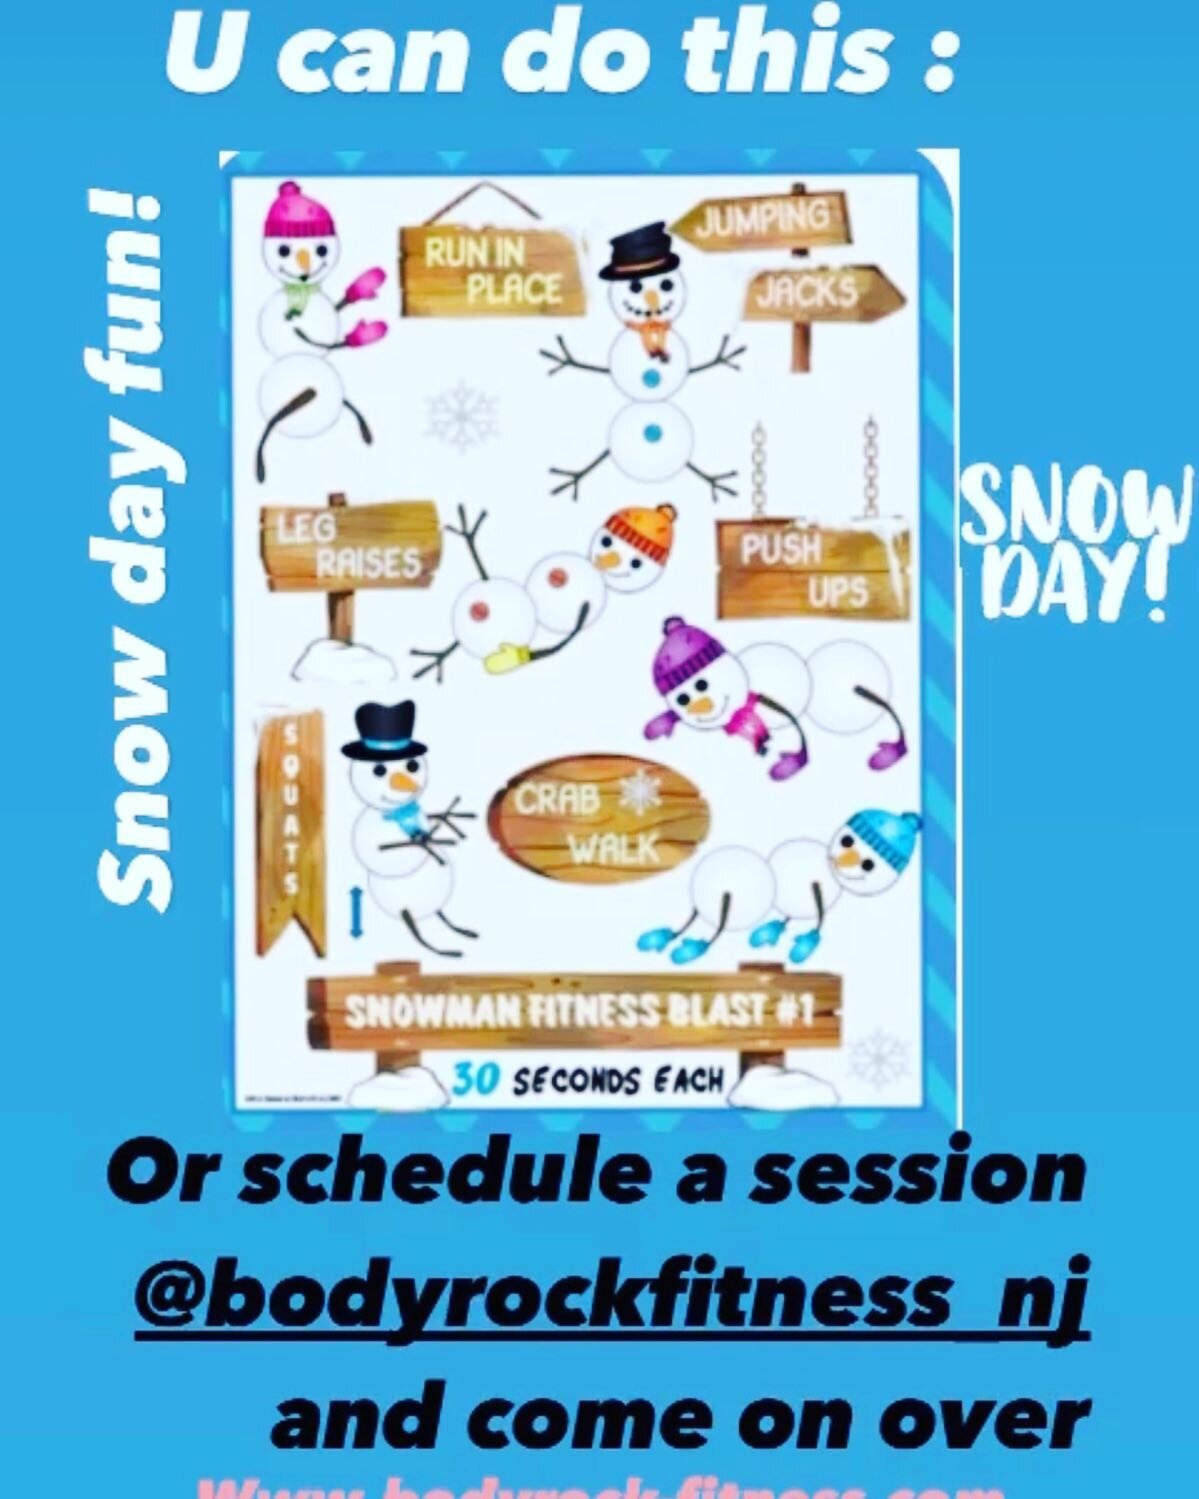 Snow day fun - come work out@ Body Rock Fitness Studio. New Month. New Goals. Schedule a session that will leave ur muscles sore and ur soul wanting more. If it ain&rsquo;t fun-ur doing something wrong in your routine 🙂. 
Www.bodyrock-fitness.com 
S